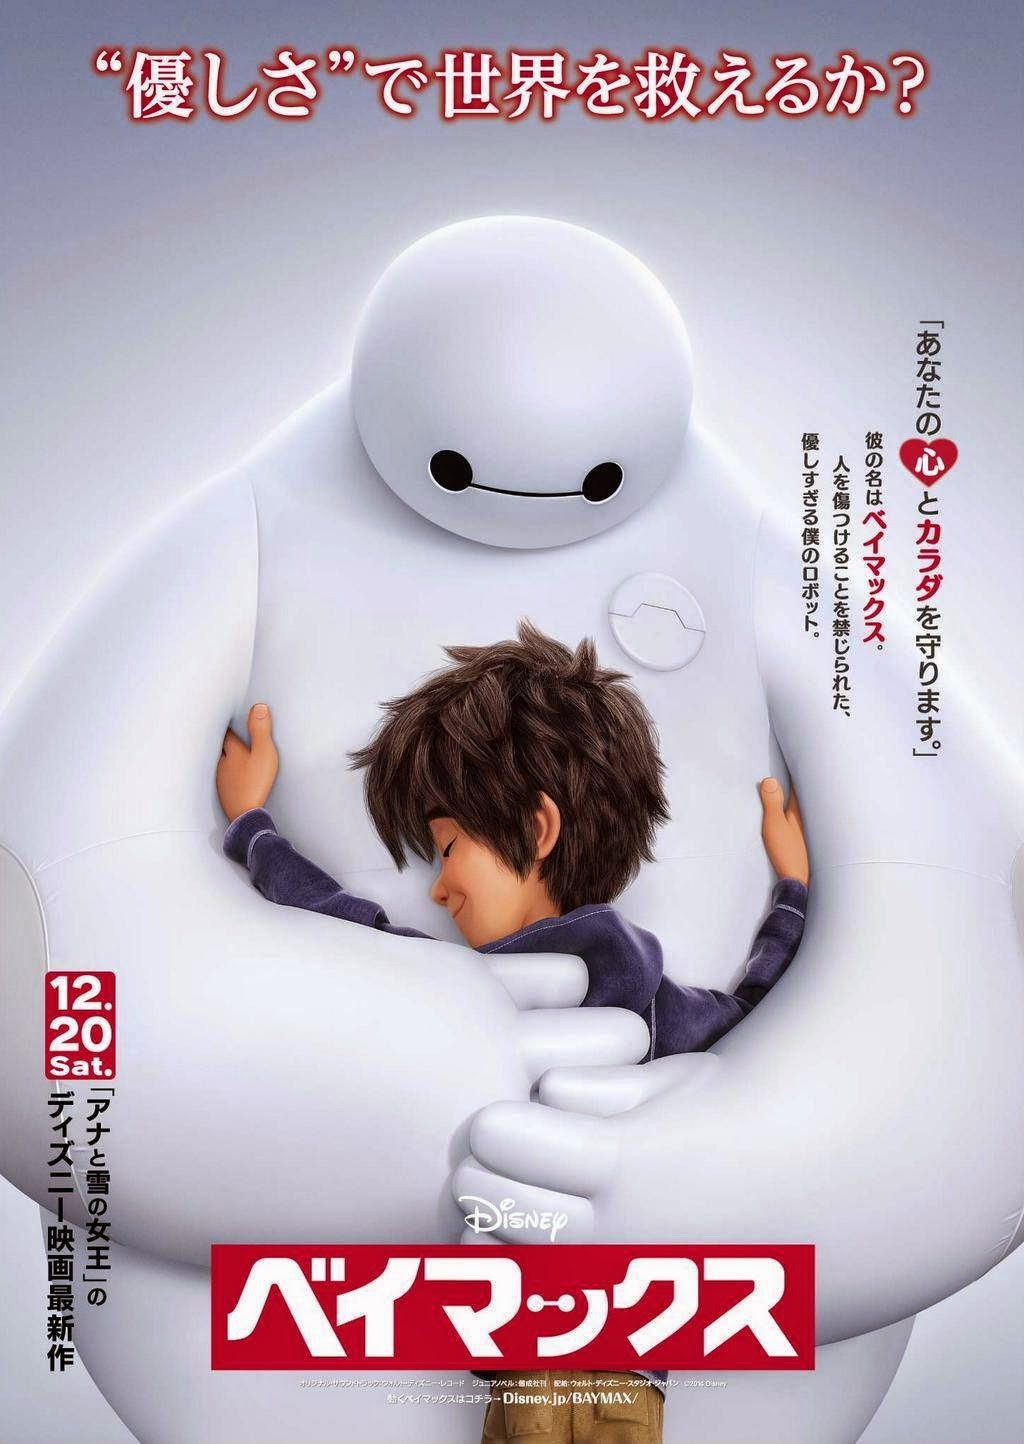 Extra Large Movie Poster Image for Big Hero 6 (#7 of 20)